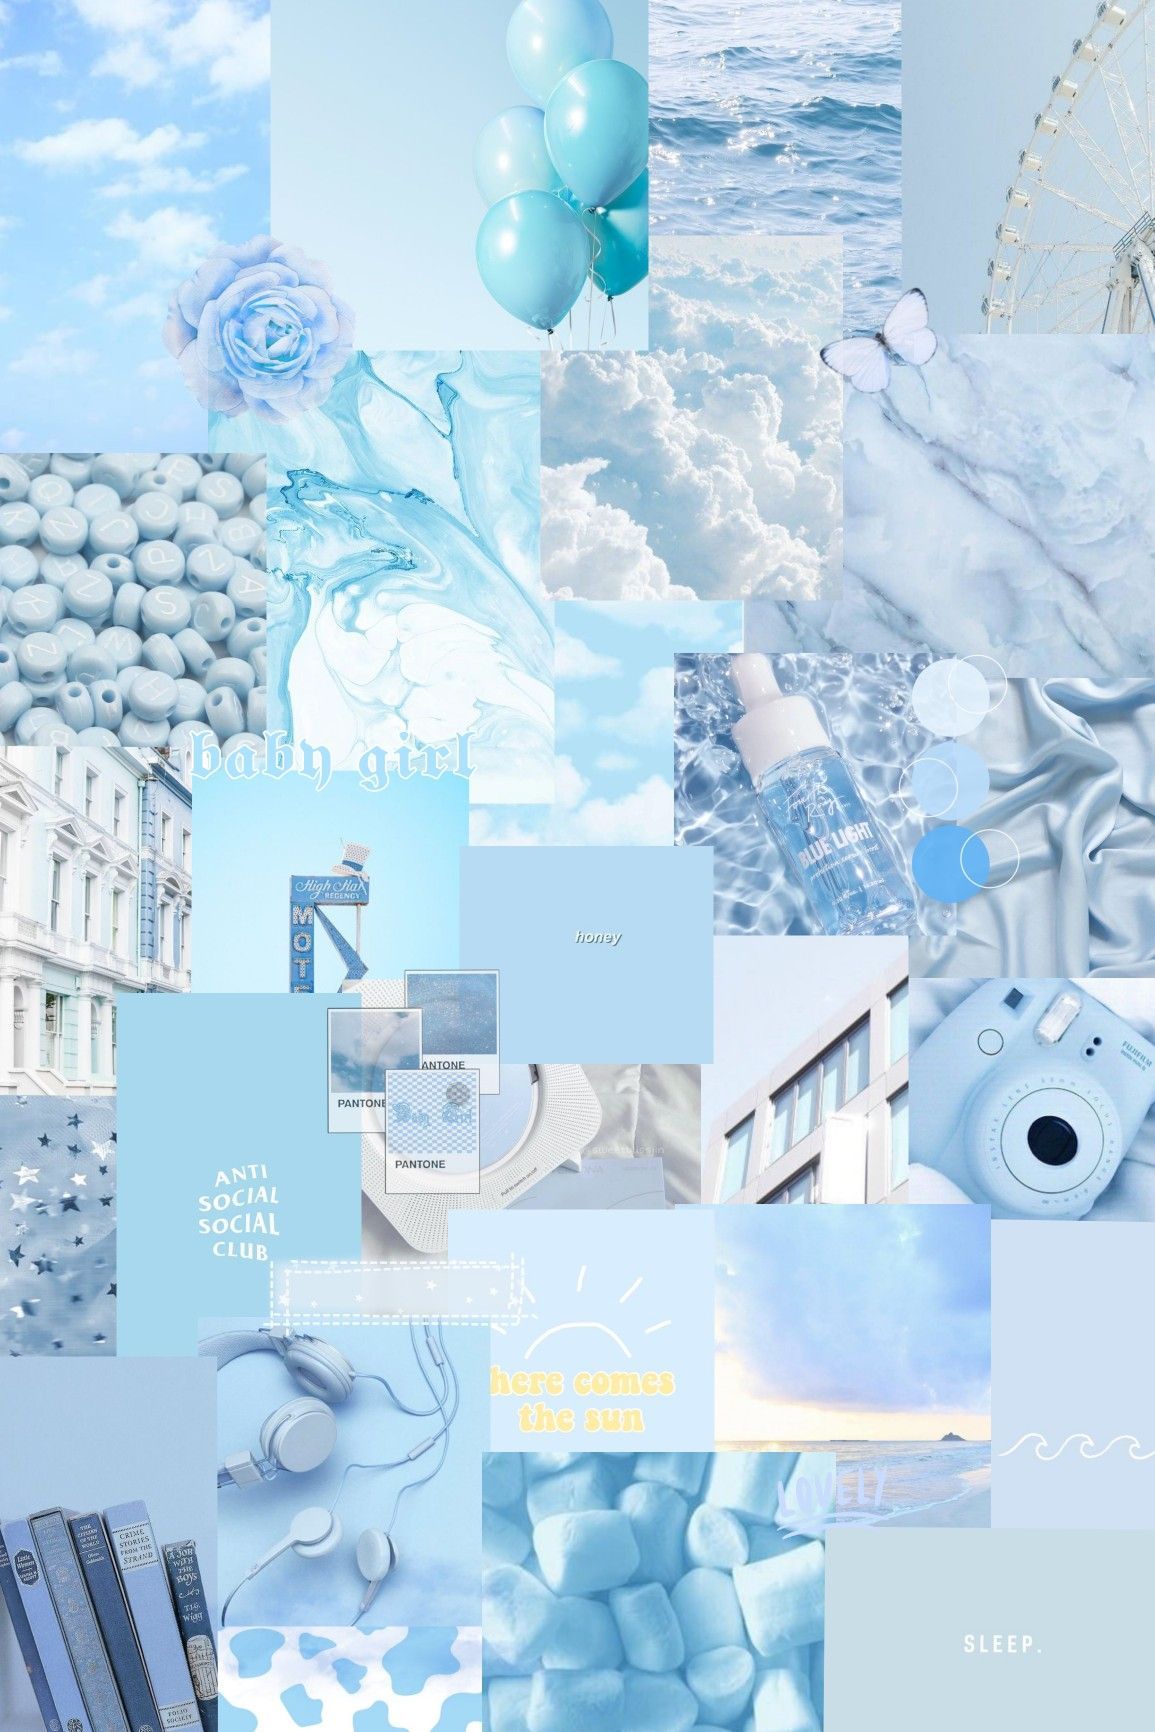 Aesthetic background with blue, white, and grey colors. - Pastel blue